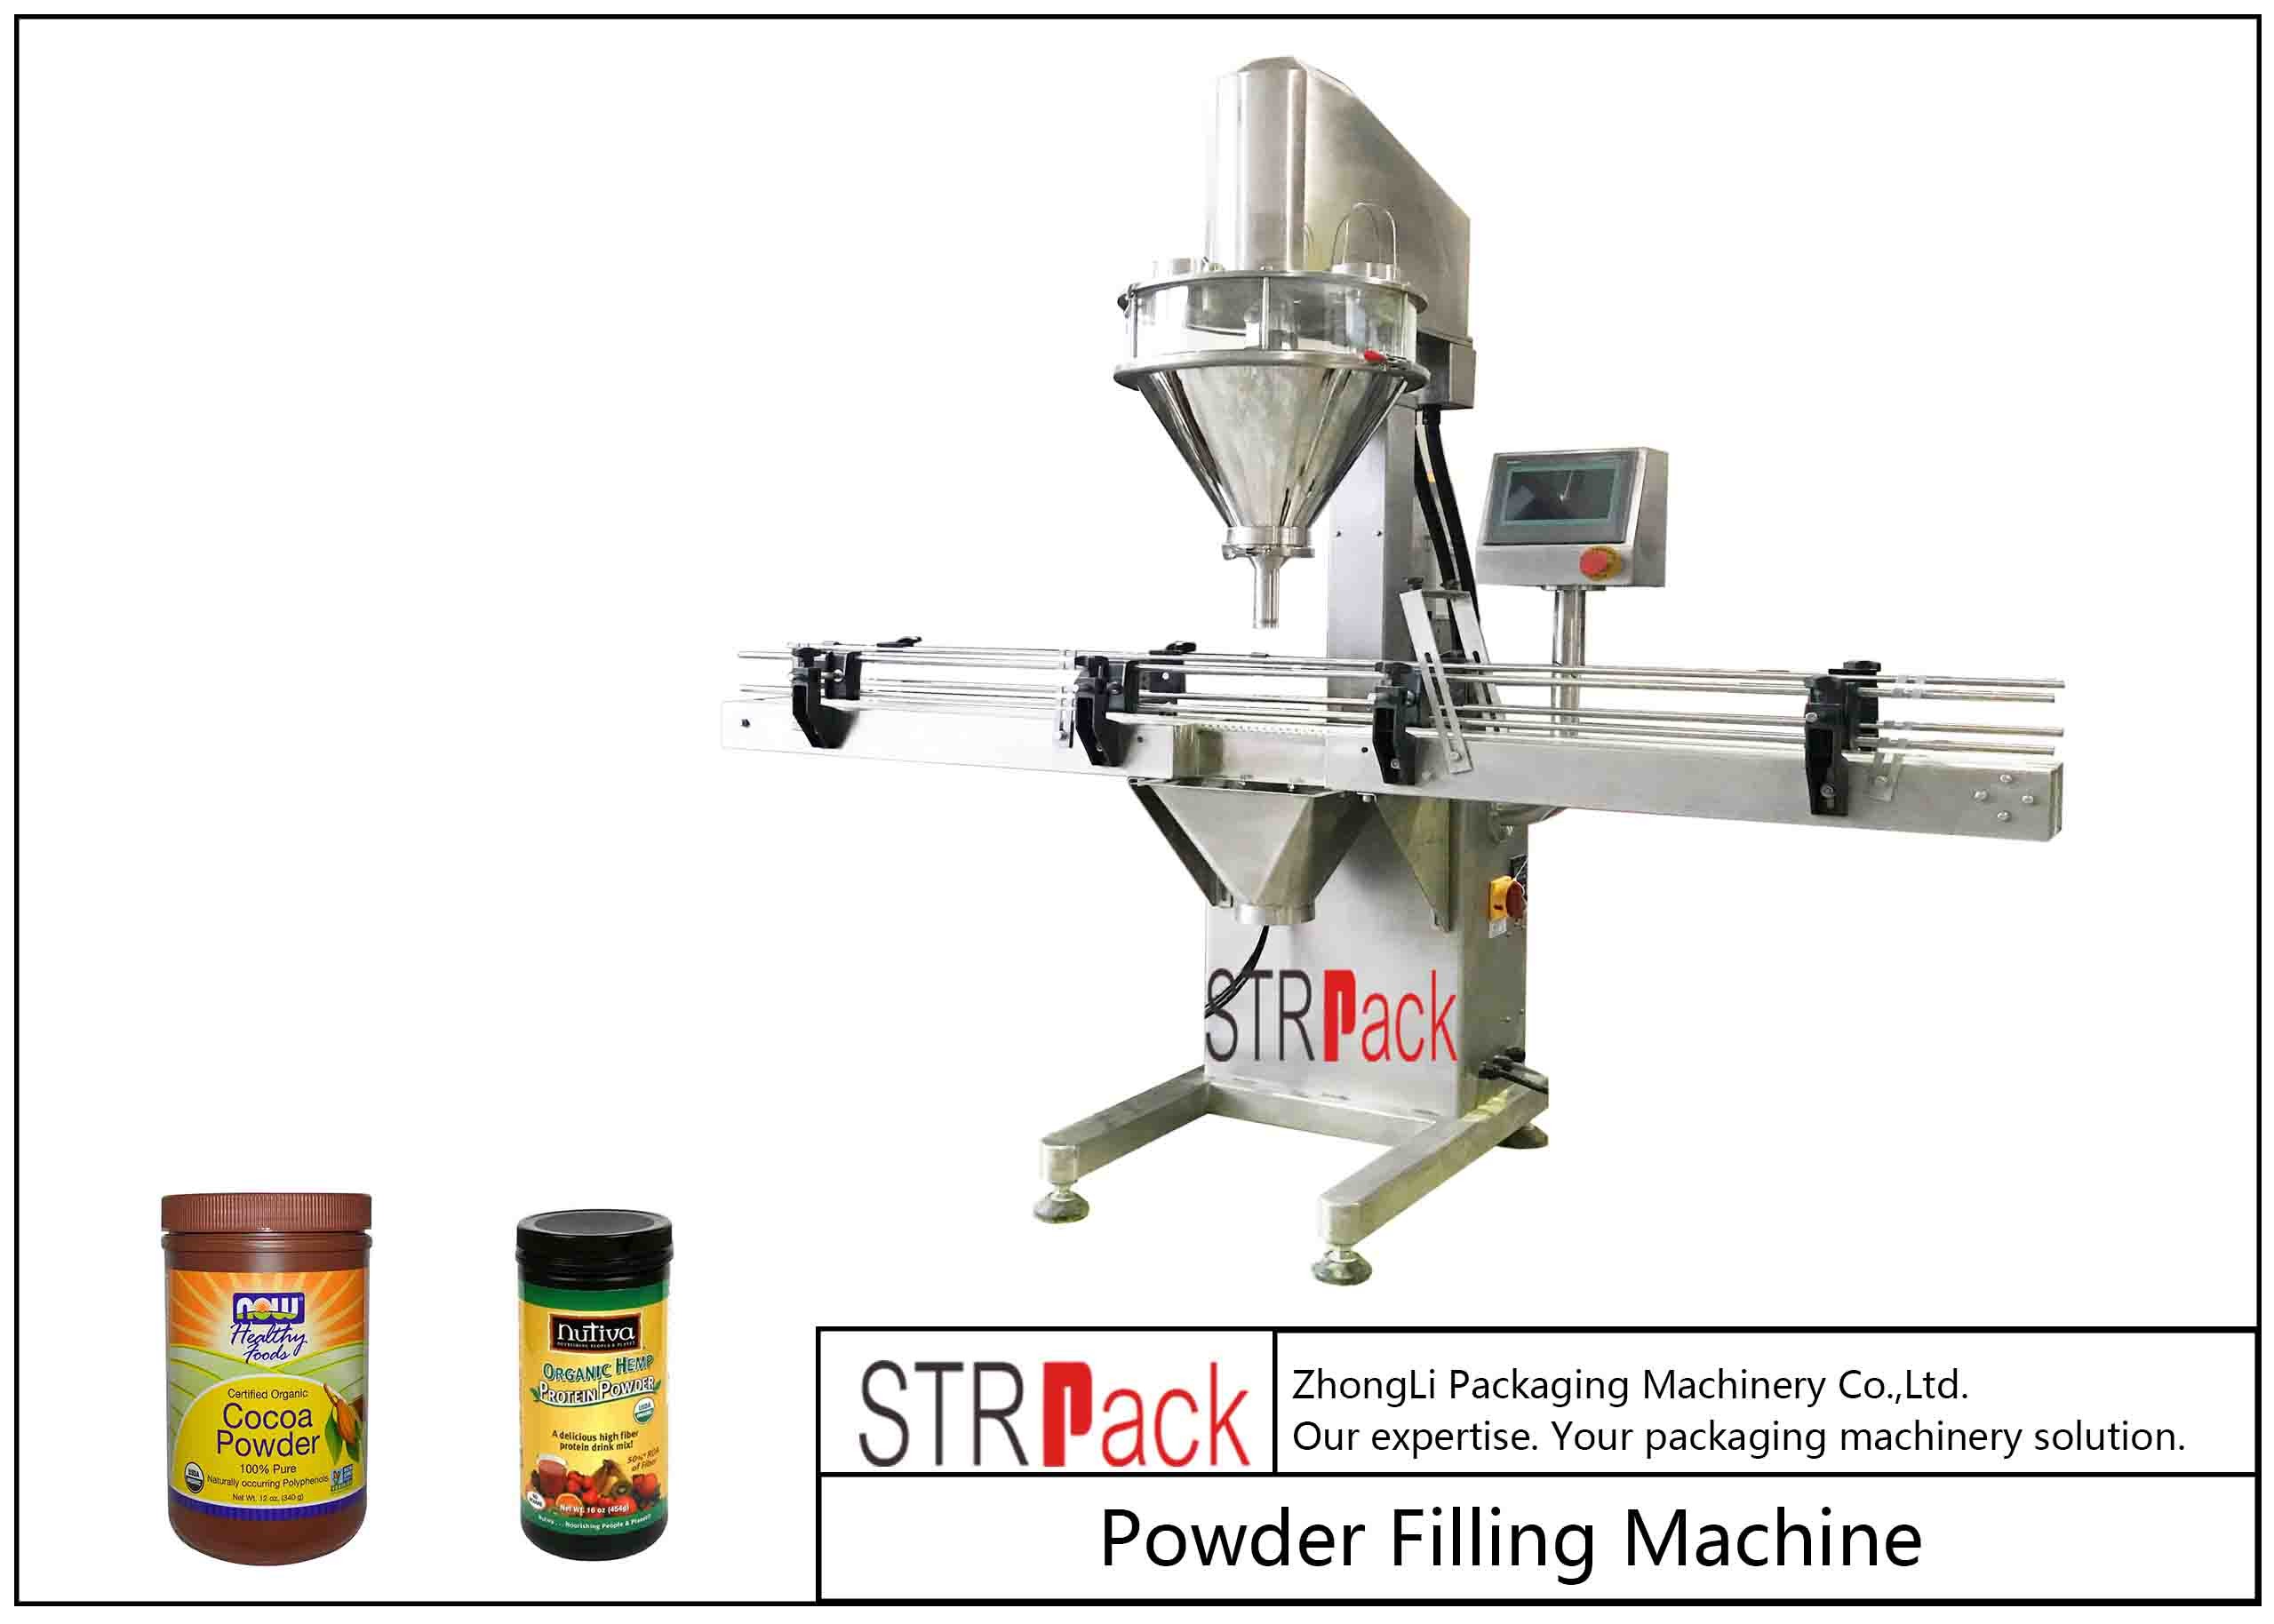 10g-5000g Linear Automatic Powder Filling Machine 50 BPM Speed With 25L Hopper